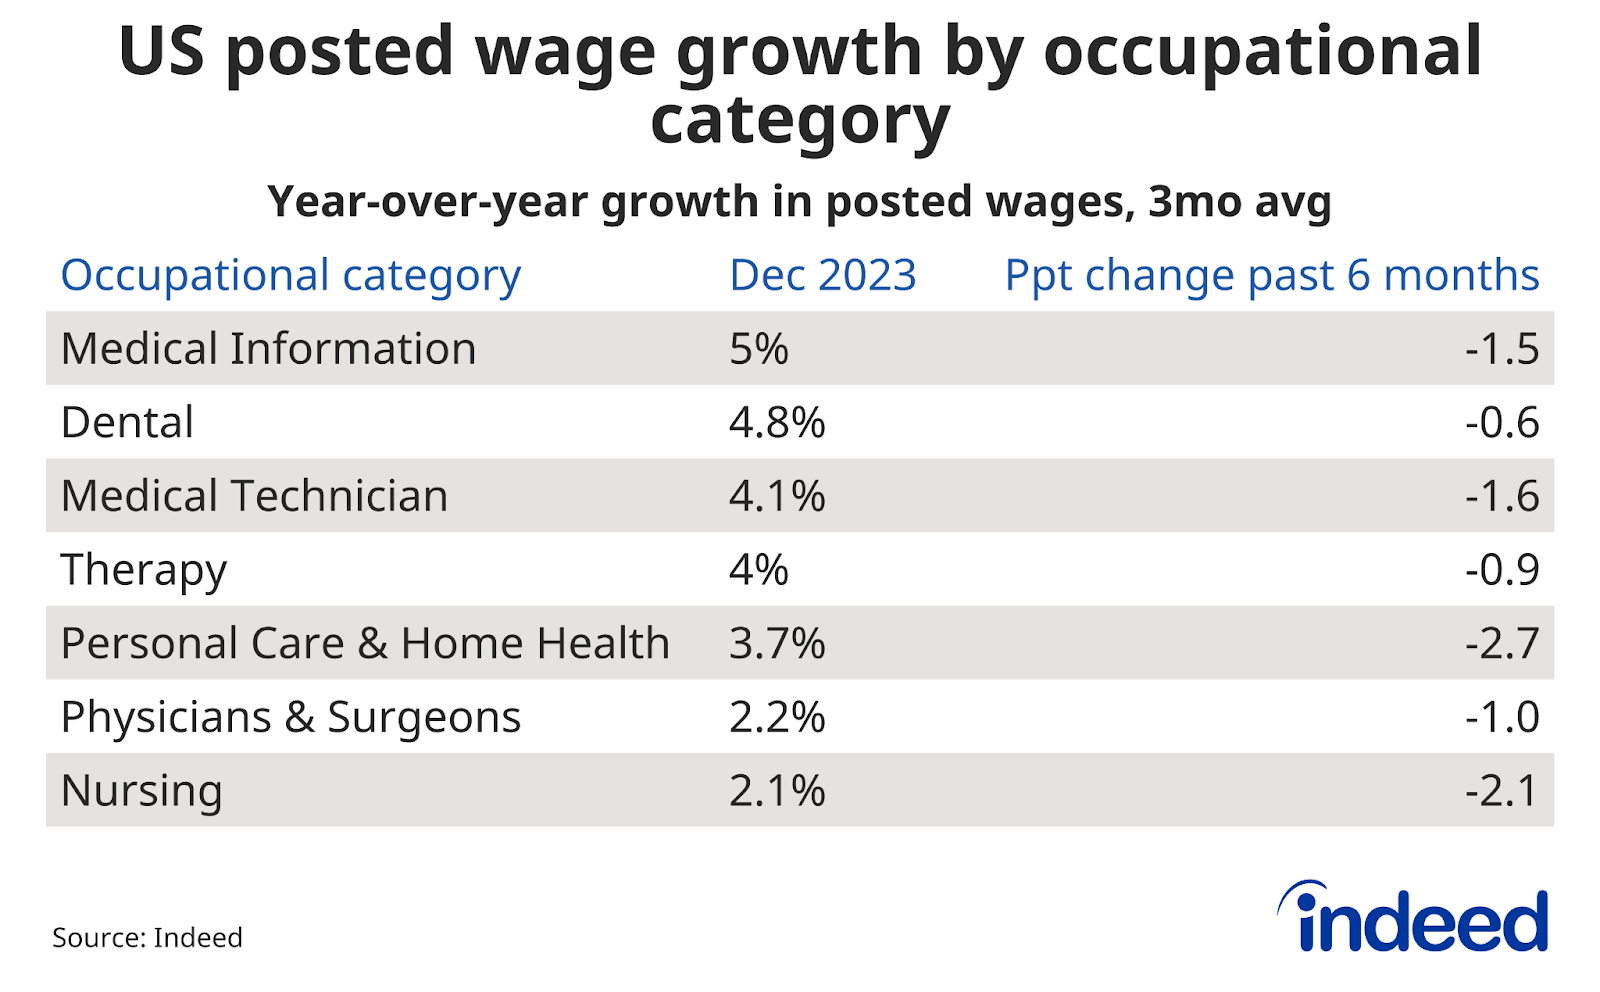 Table showing year-over-year growth in posted wages through December 2023, and the percentage point change in the past six months, by job category. Personal Care & Home Health and Nursing wages have grown 3.7% and 2.1% year-over-year, respectively.